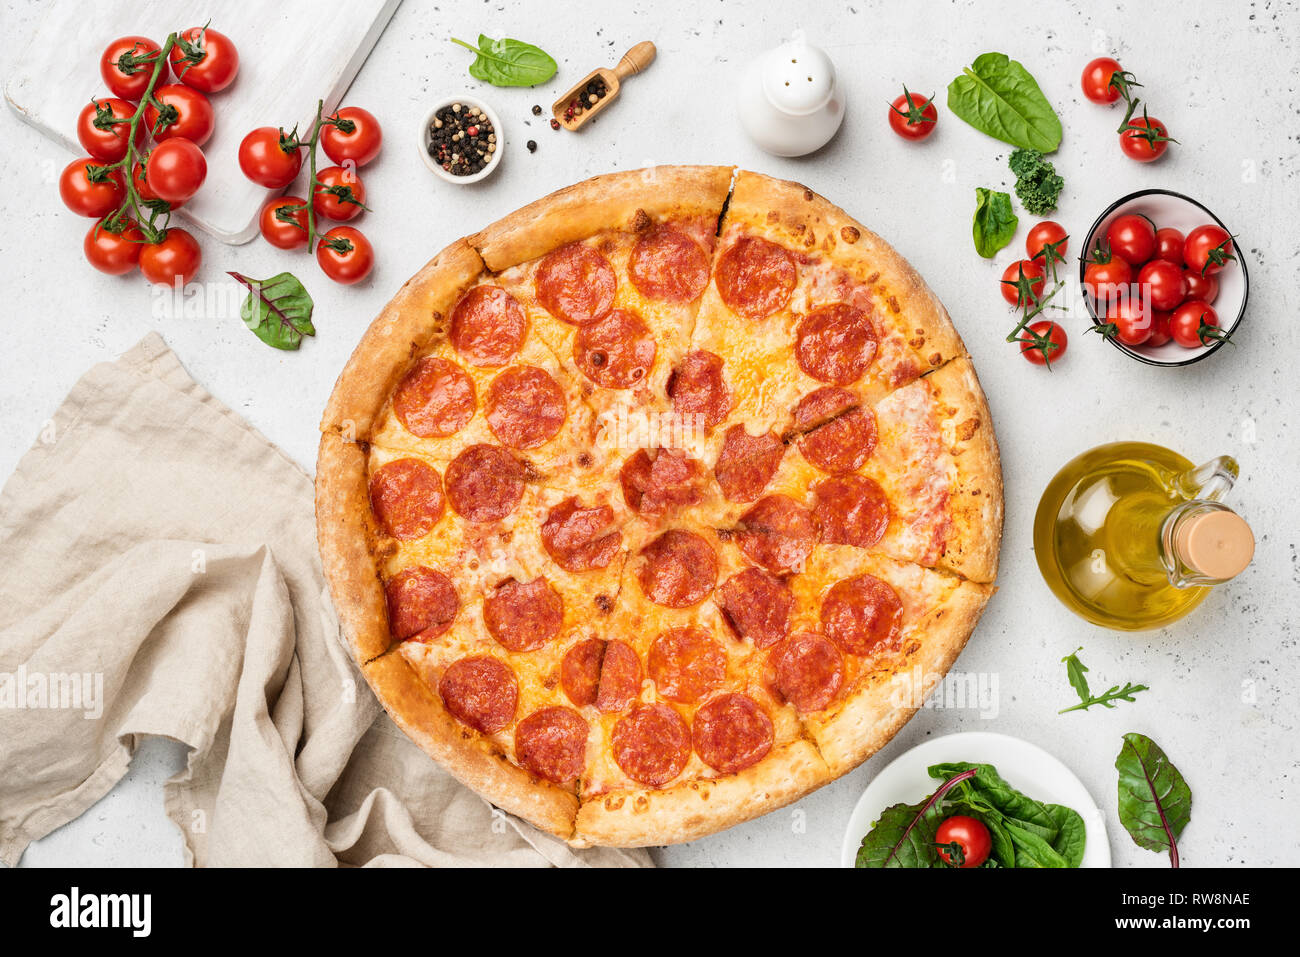 Tasty Pepperoni Pizza On White Background. Pizza, Olive Oil, Cherry tomatoes, Green Leaf Salad Mangold, Arugula and Pepper. Table top view Stock Photo